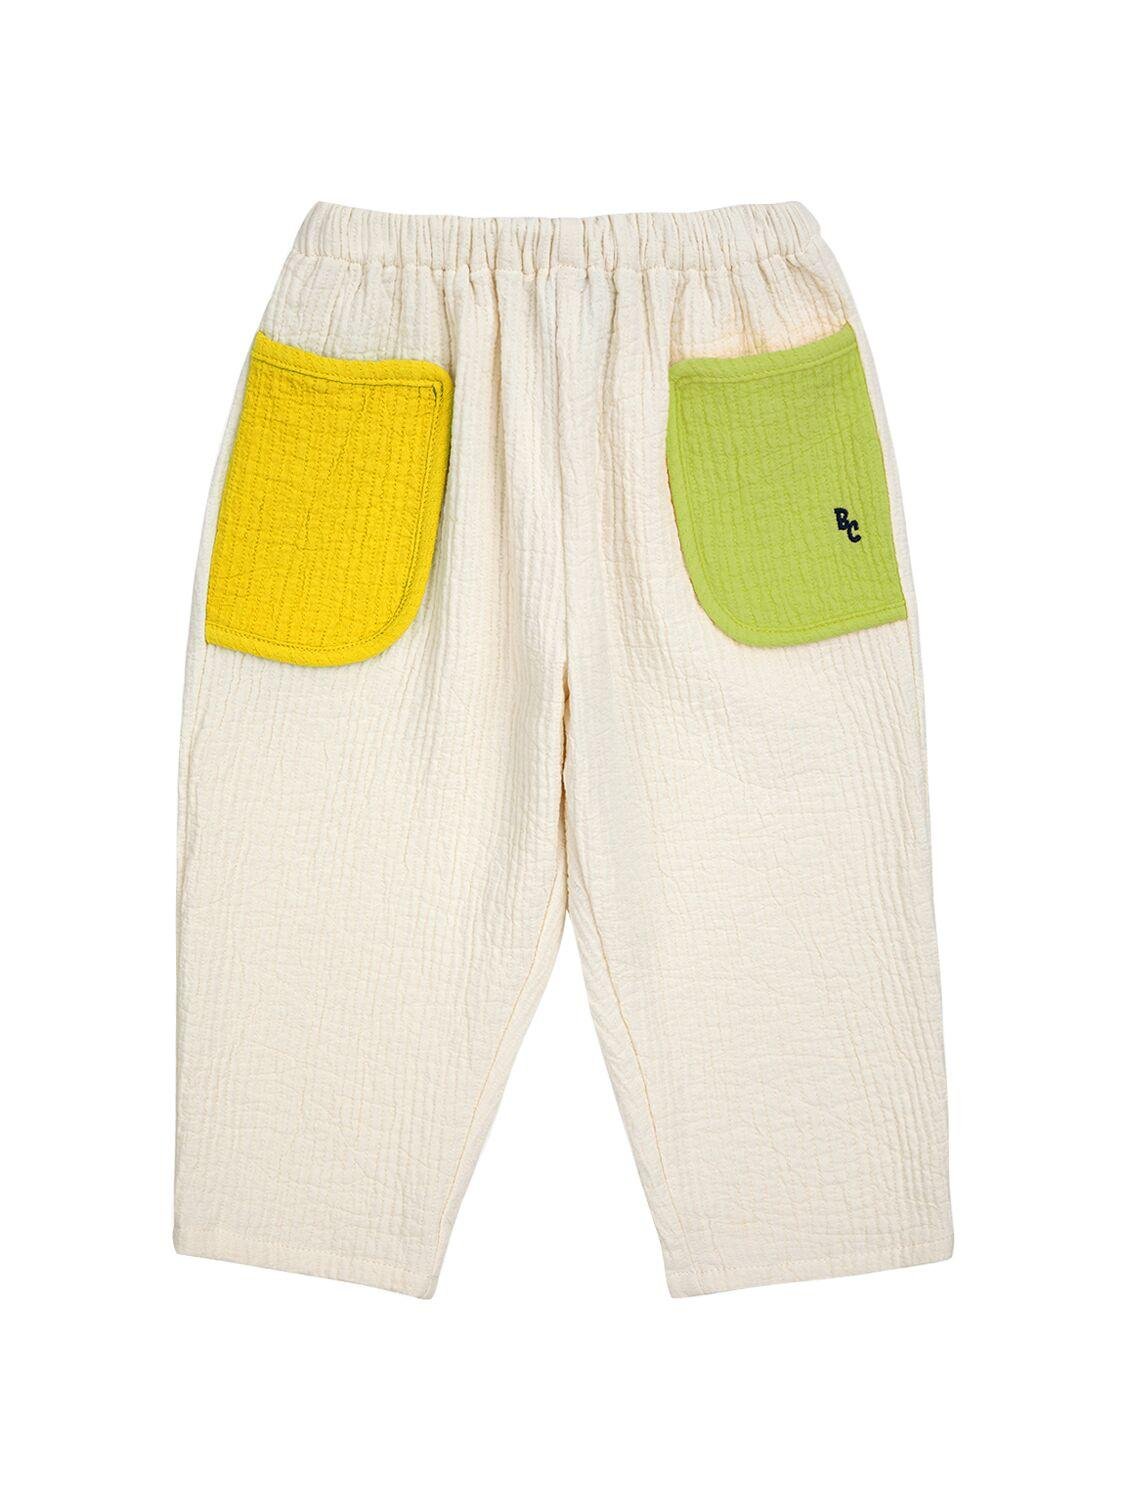 Wrinkled Quilted Cotton Pants by BOBO CHOSES